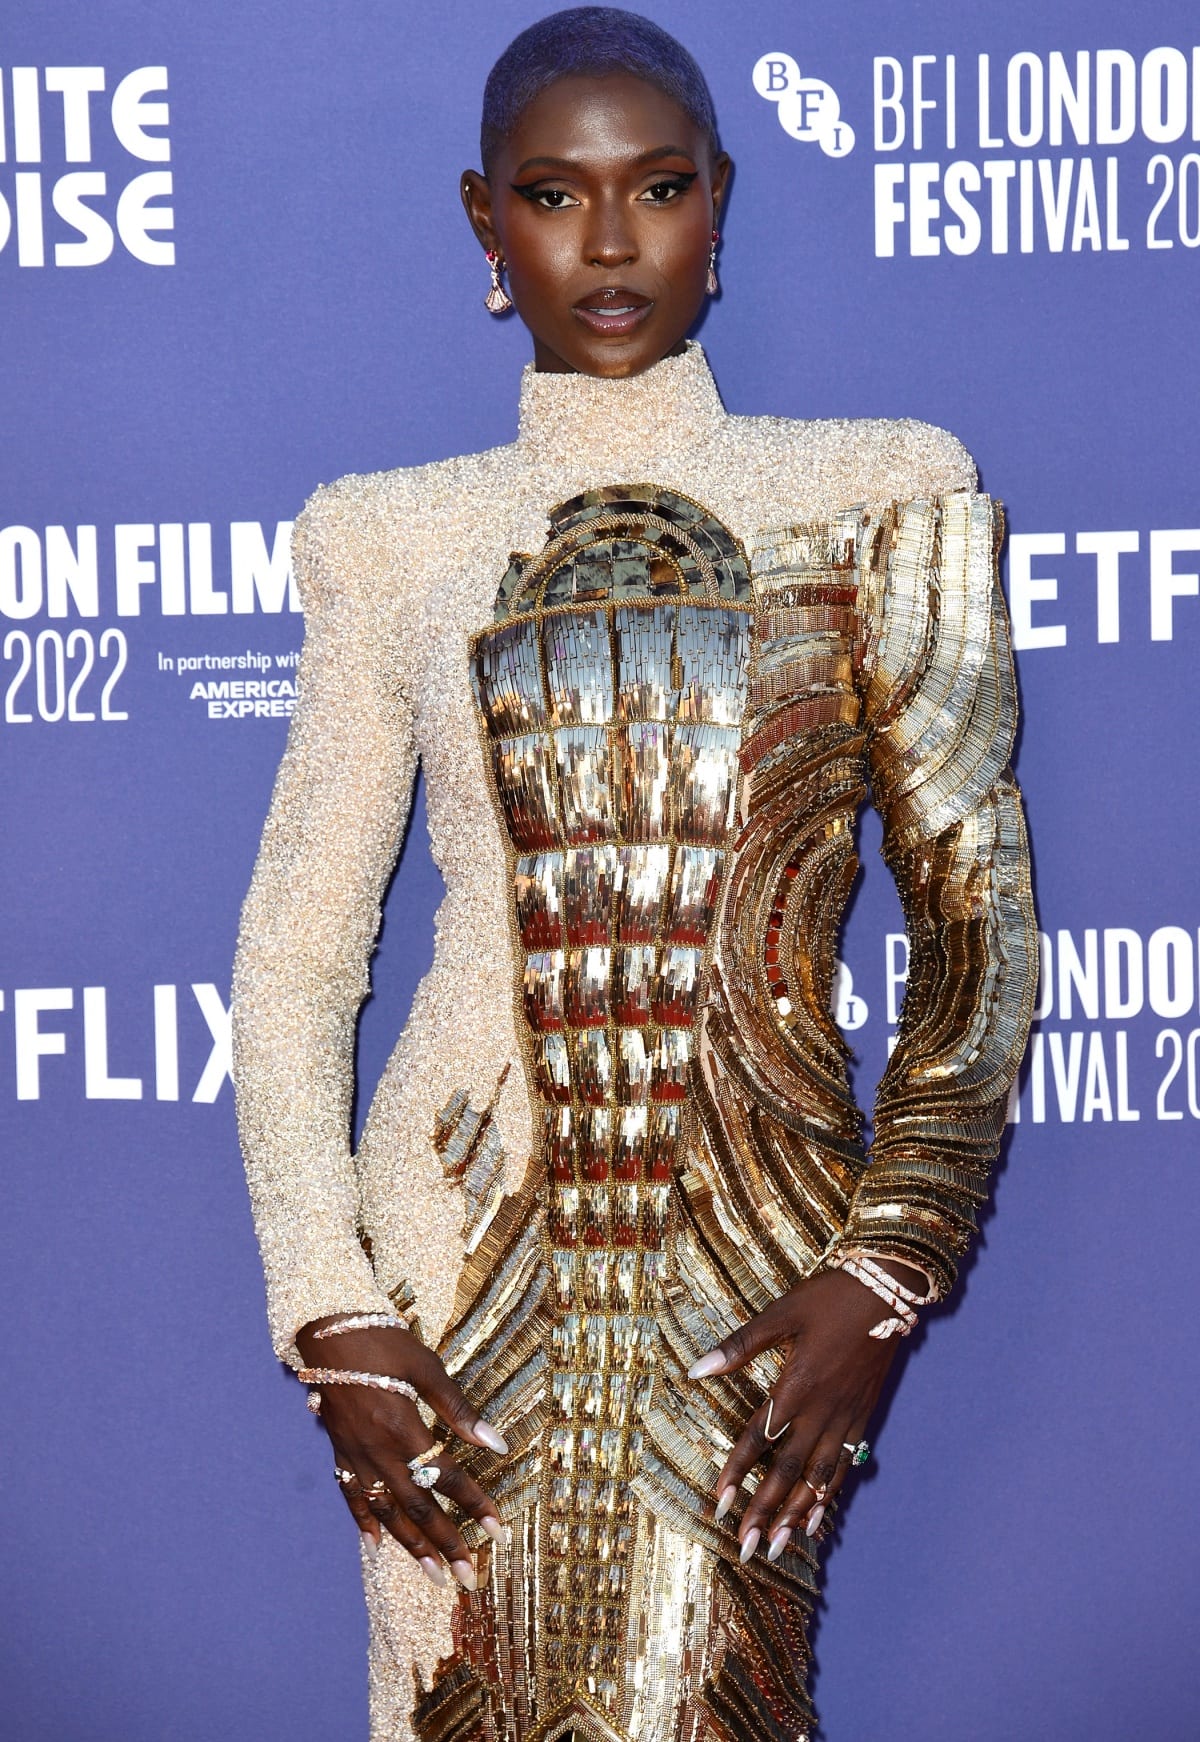 Bringing drama and effortless grace to red carpet fashion, Jodie Turner-Smith is Hollywood’s newest favorite style star